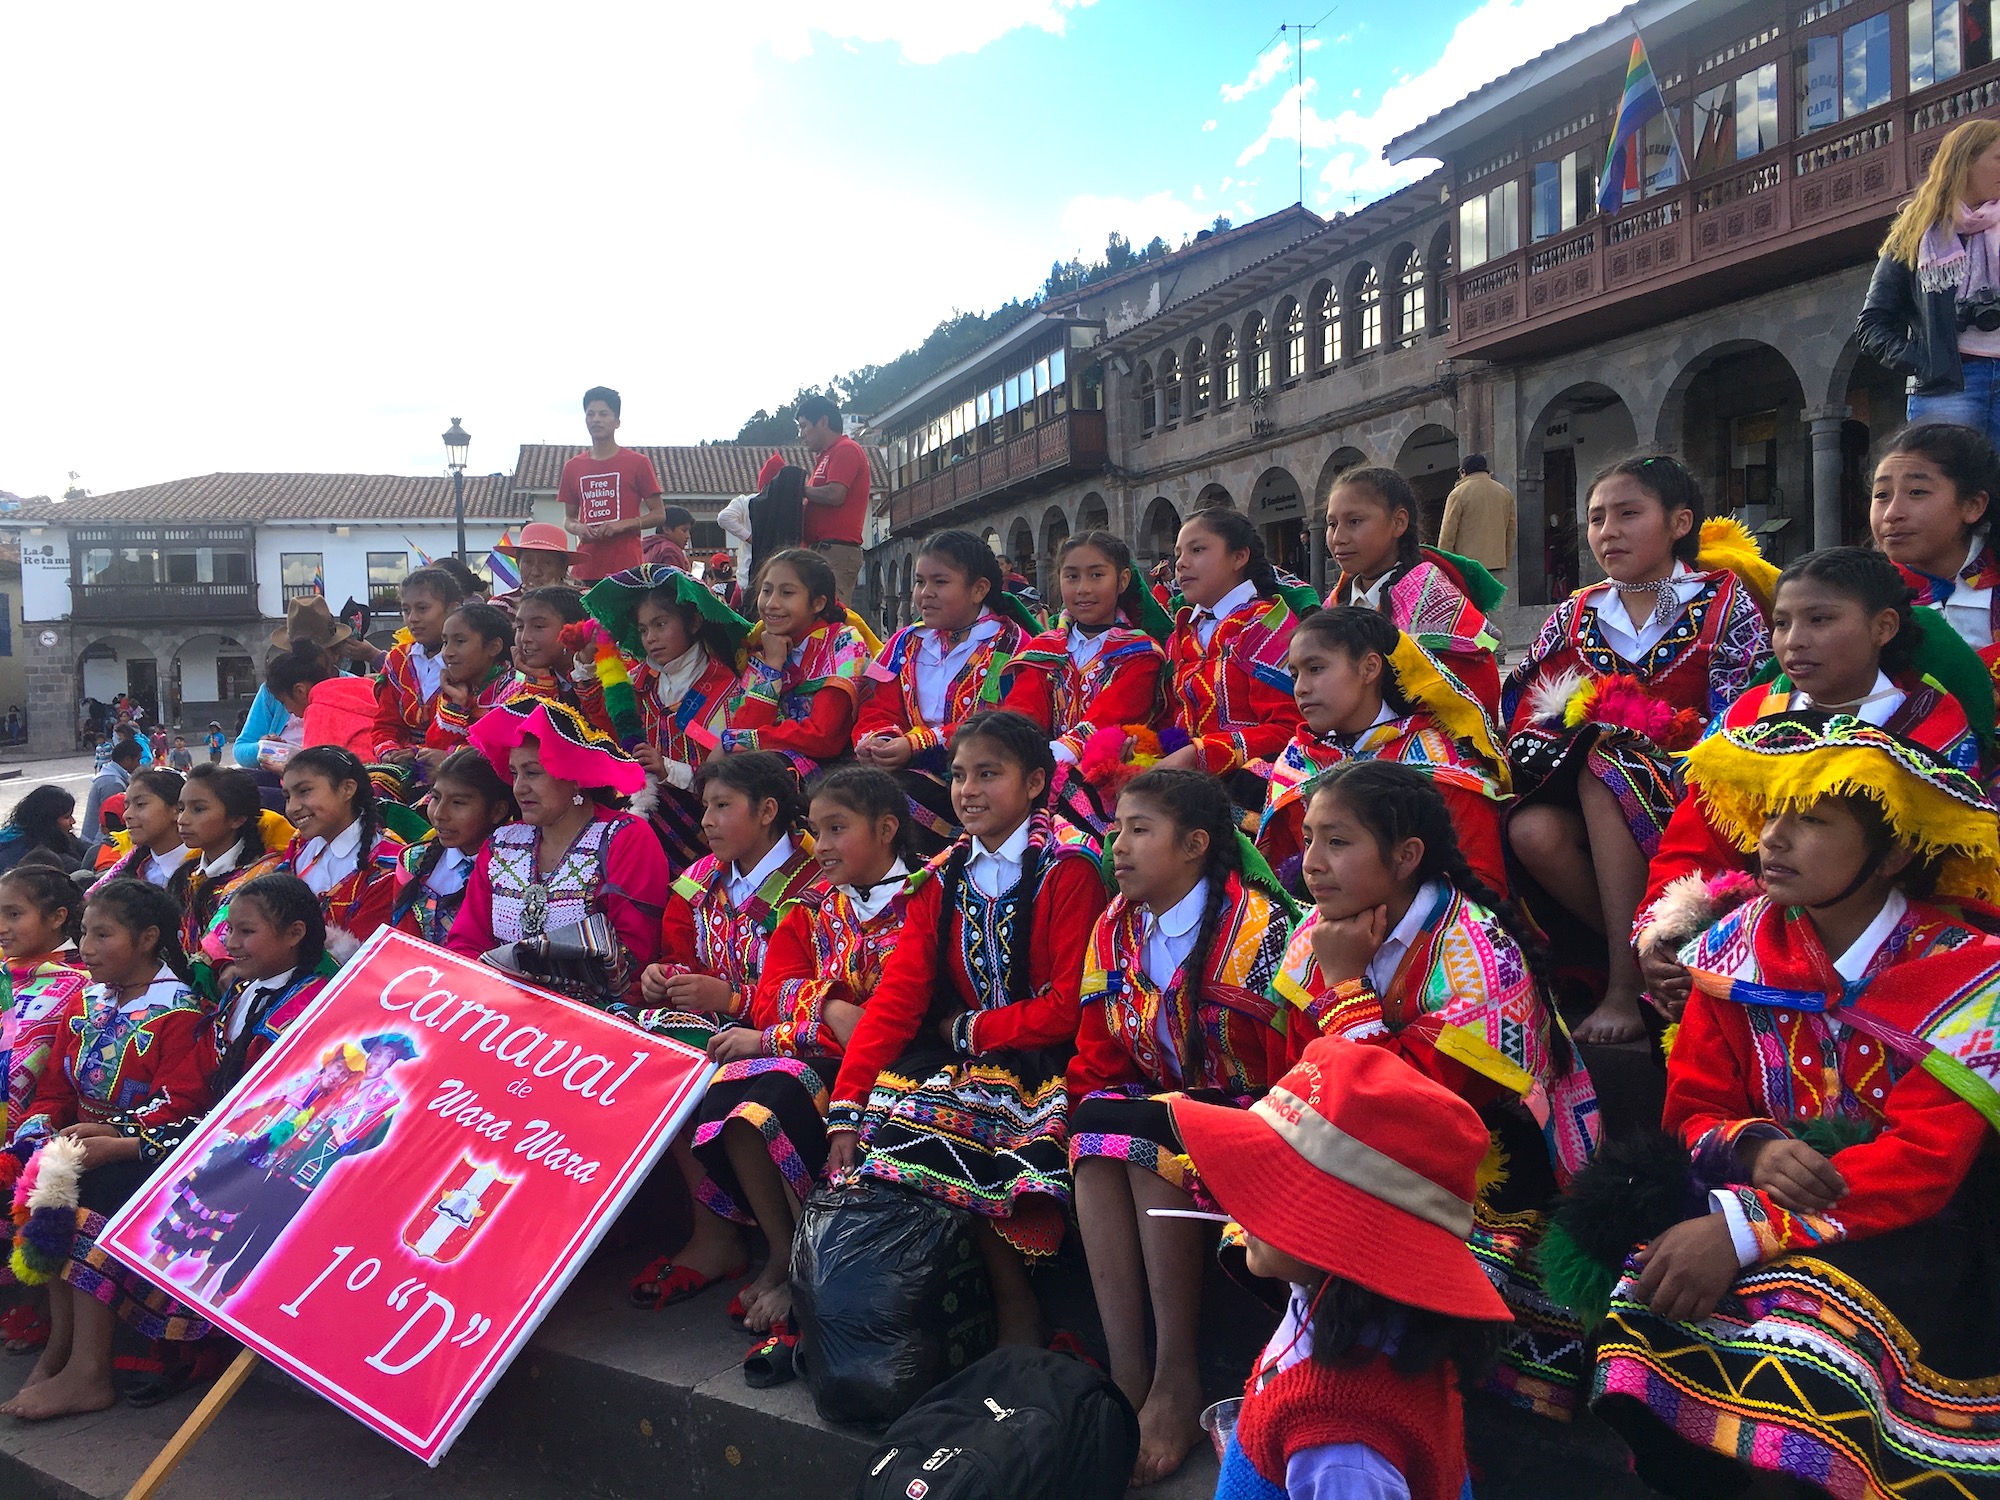 Childreen of Cusco parading for the Jubilee festivities of June